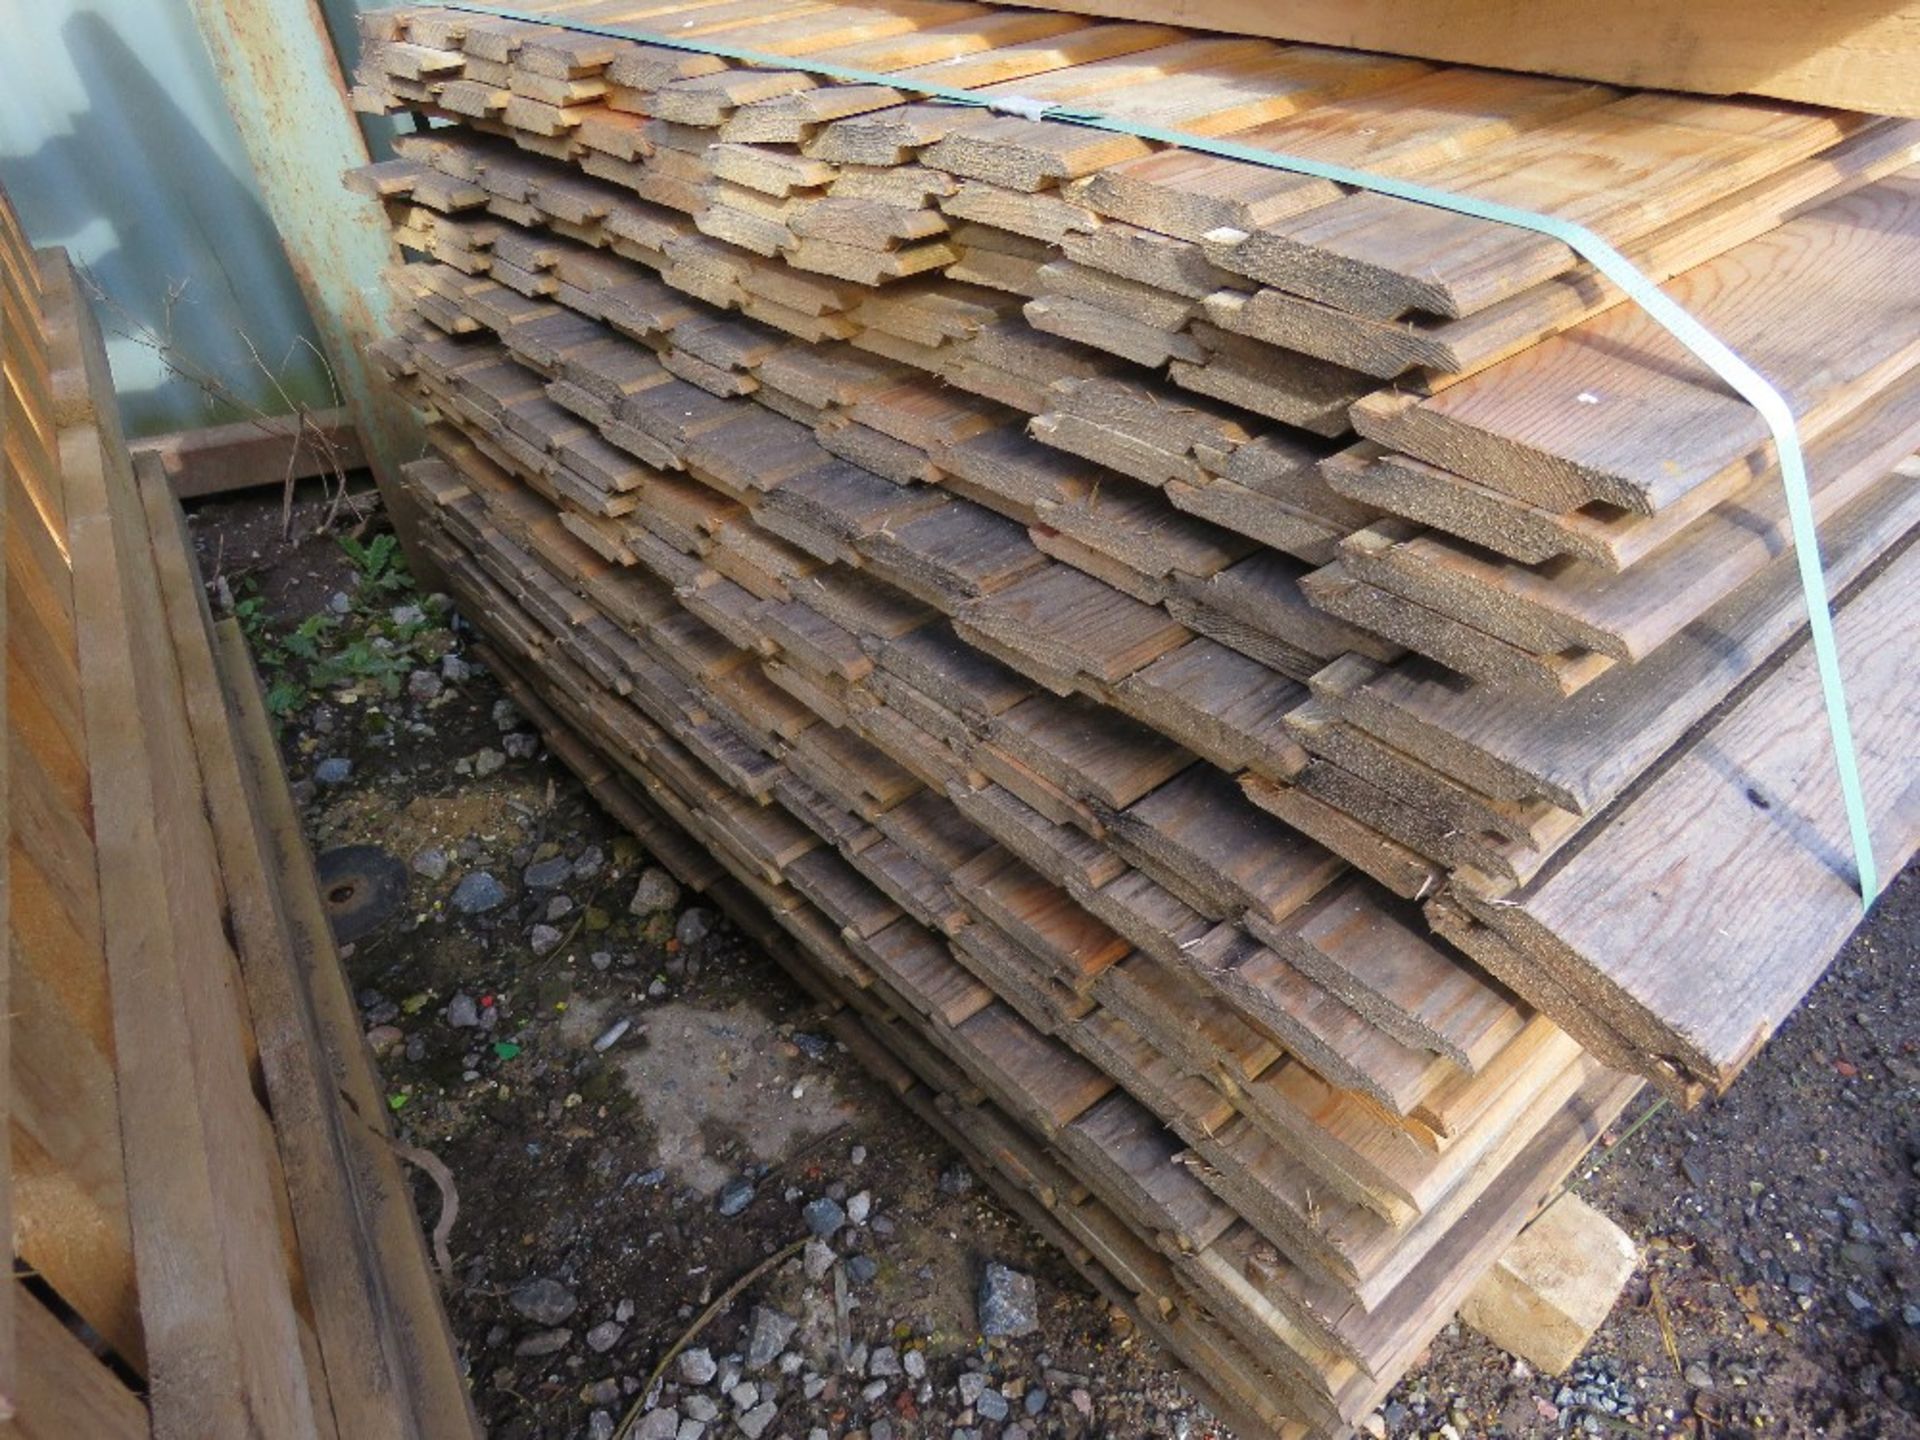 PACK OF UNTREATED SHIPLAP CLADDING TIMBER 1.83M X 10CM WIDTH APPROX. - Image 2 of 3